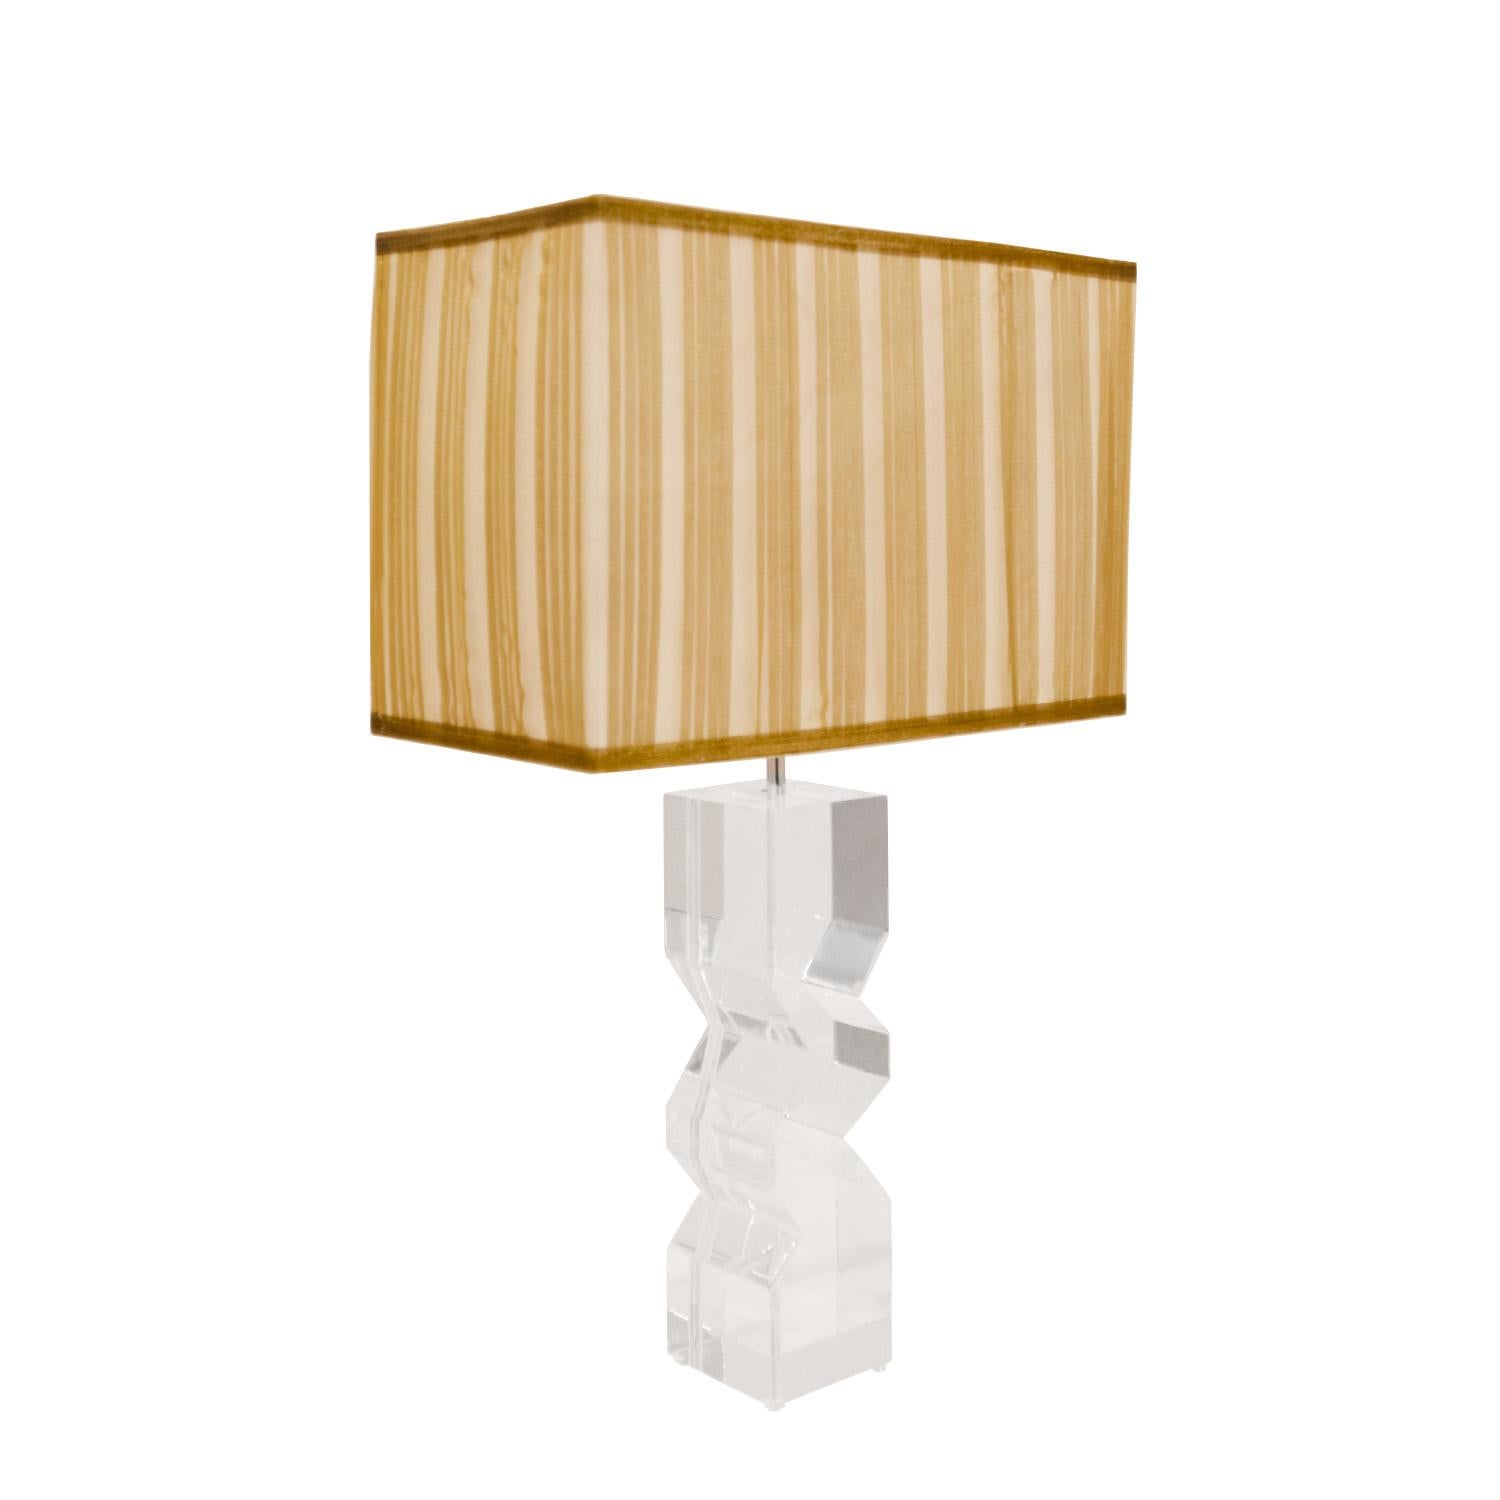 Mid-Century Modern Les Prismatiques Zig Zag Table Lamp in Solid Lucite 1970s 'Signed' For Sale